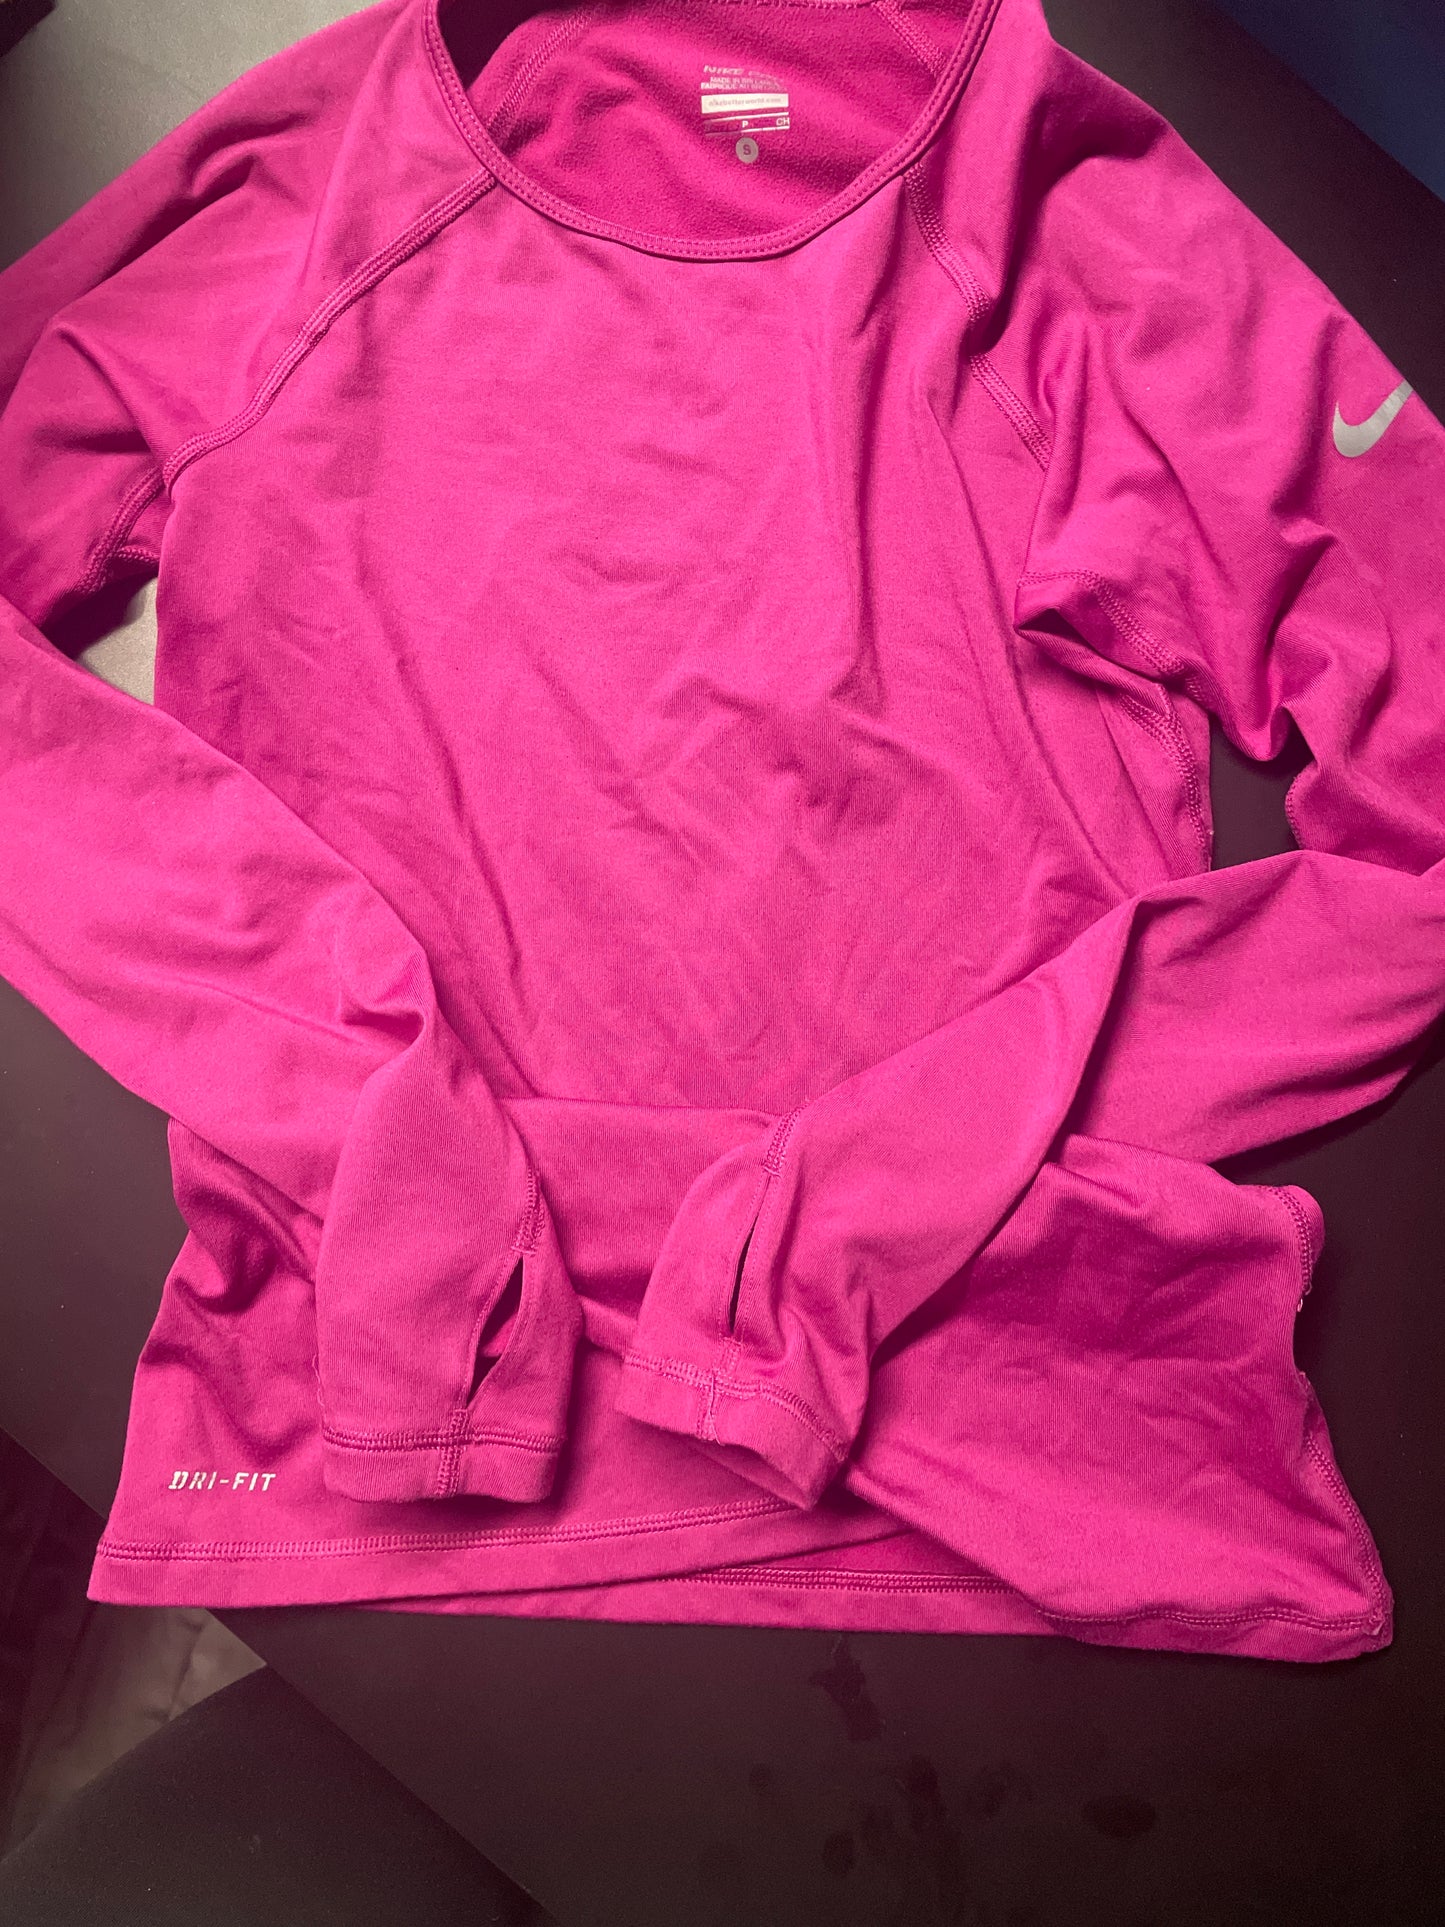 Women’s small Nike thermal dri fit pink long sleeve shirt with thumb holes